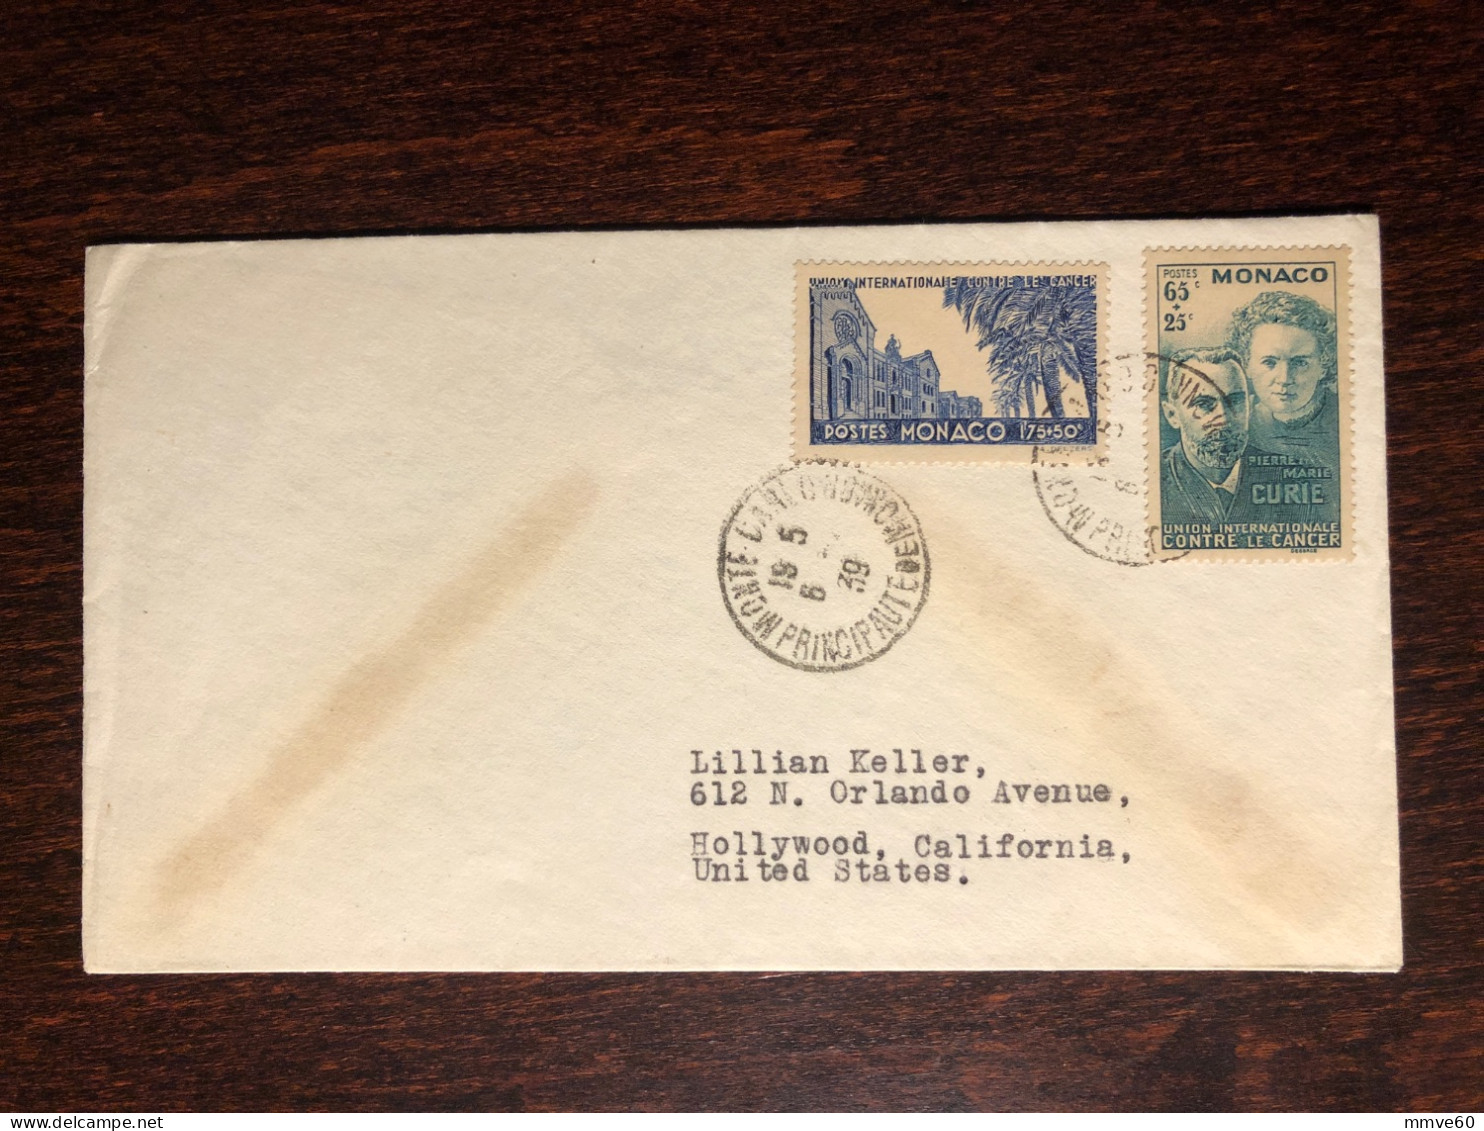 MONACO FDC TRAVELLED COVER LETTER TO USA 1939 YEAR  CURIE CANCER HEALTH MEDICINE - Cartas & Documentos